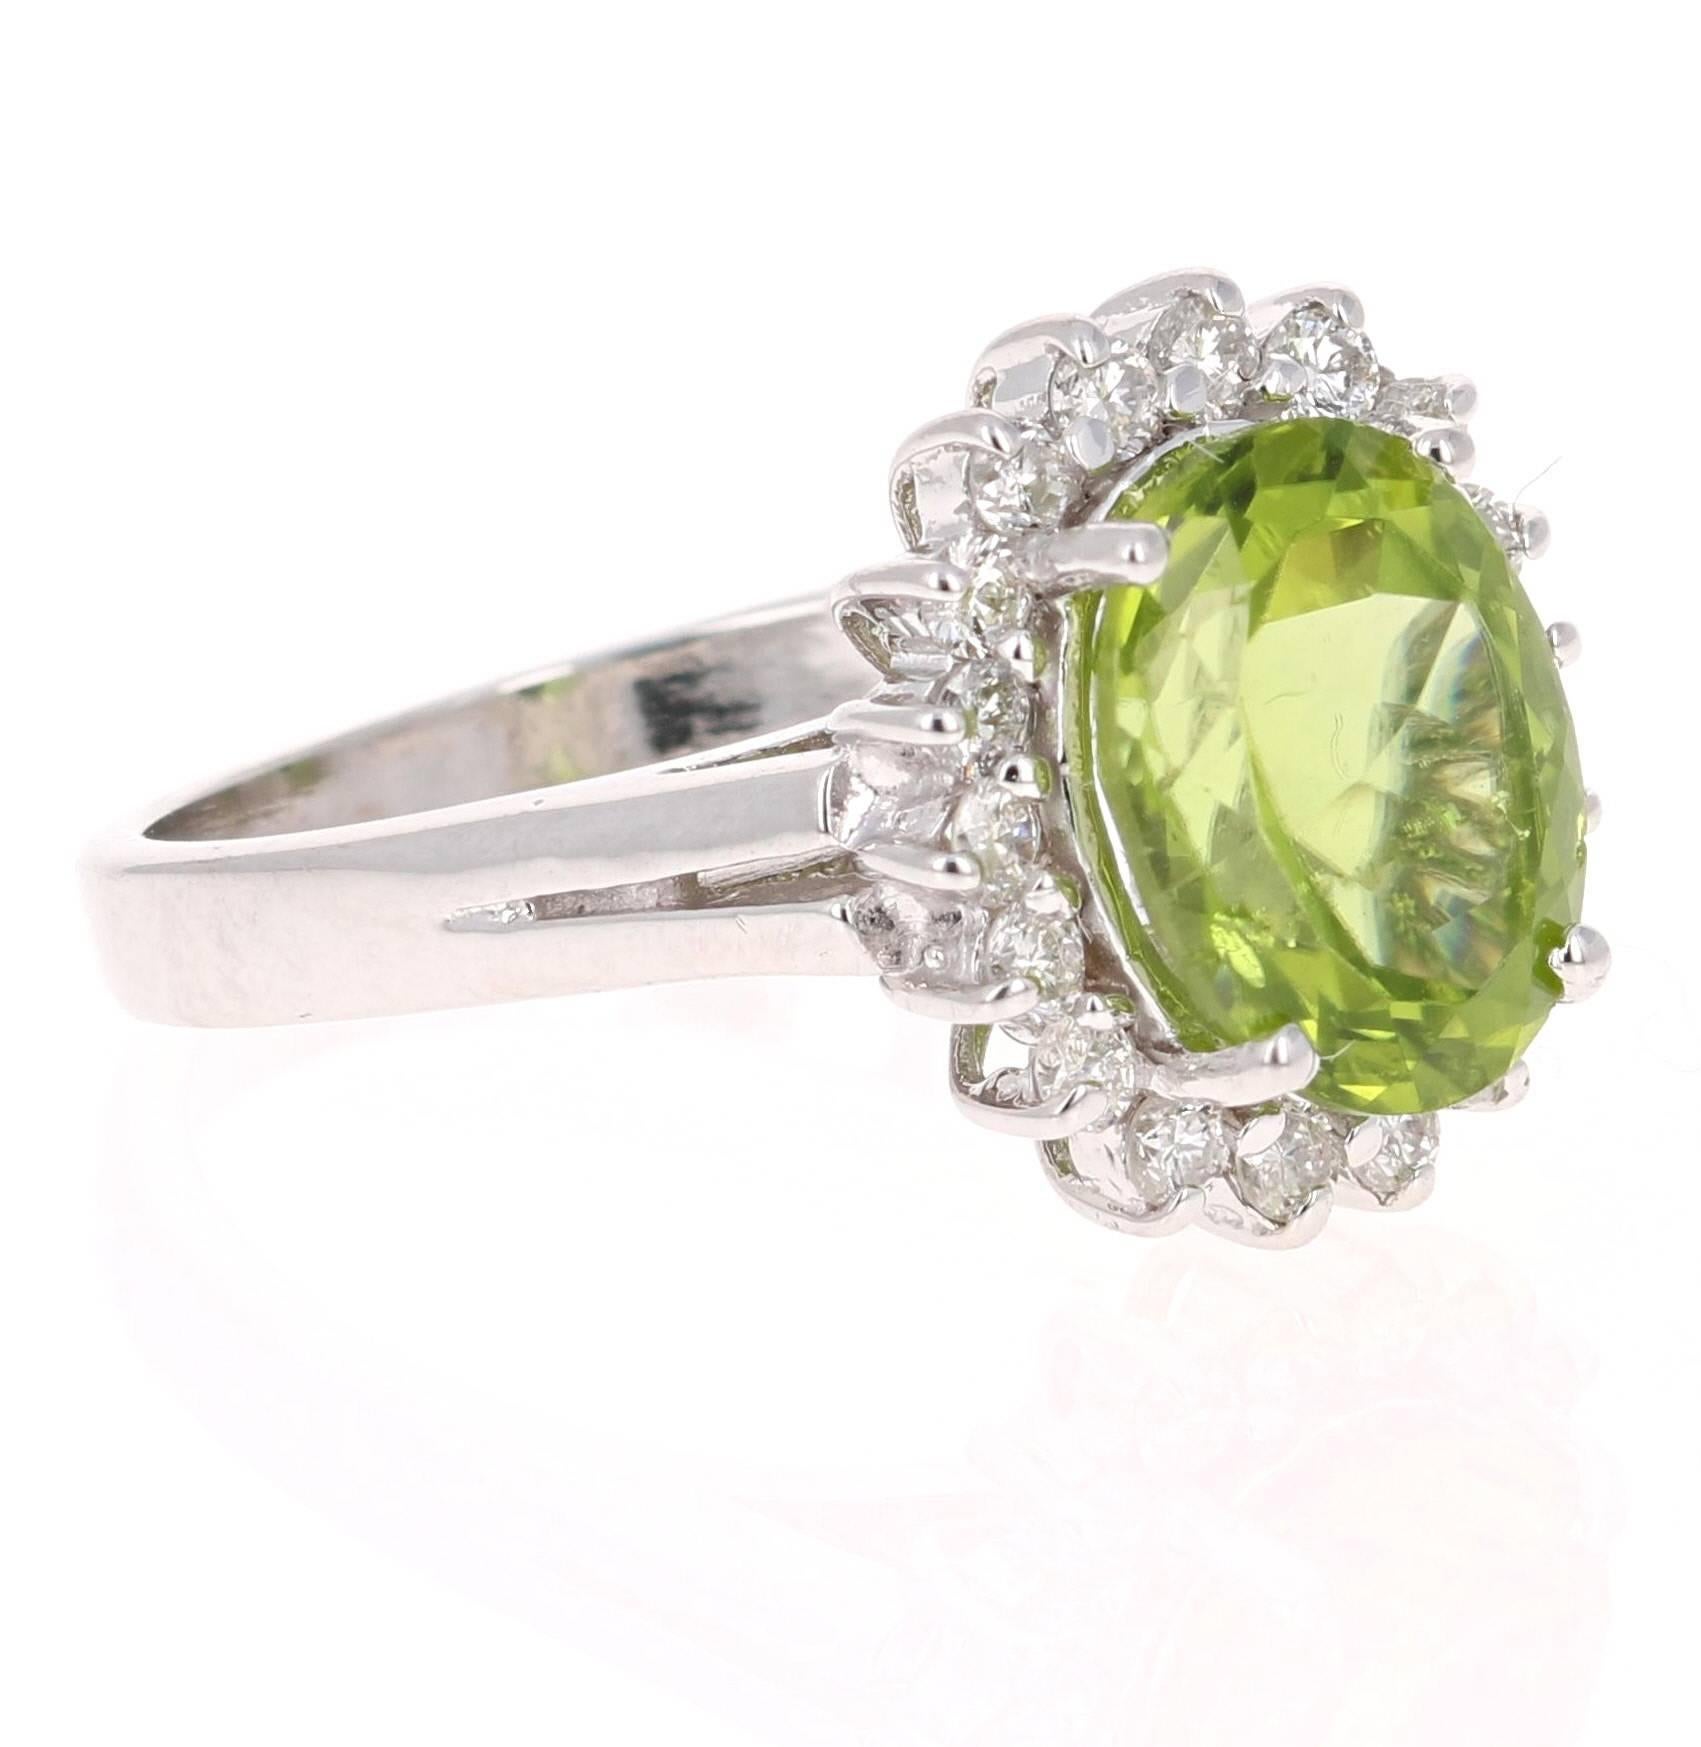 This beautiful ring has a Oval Cut Peridot in the center that weighs 2.99 carats. The ring is surrounded by a cute halo of 18 Round Cut Diamonds that weigh 0.42 carats. The total carat weight of the ring is 3.41 carats. The setting is crafted in 14K